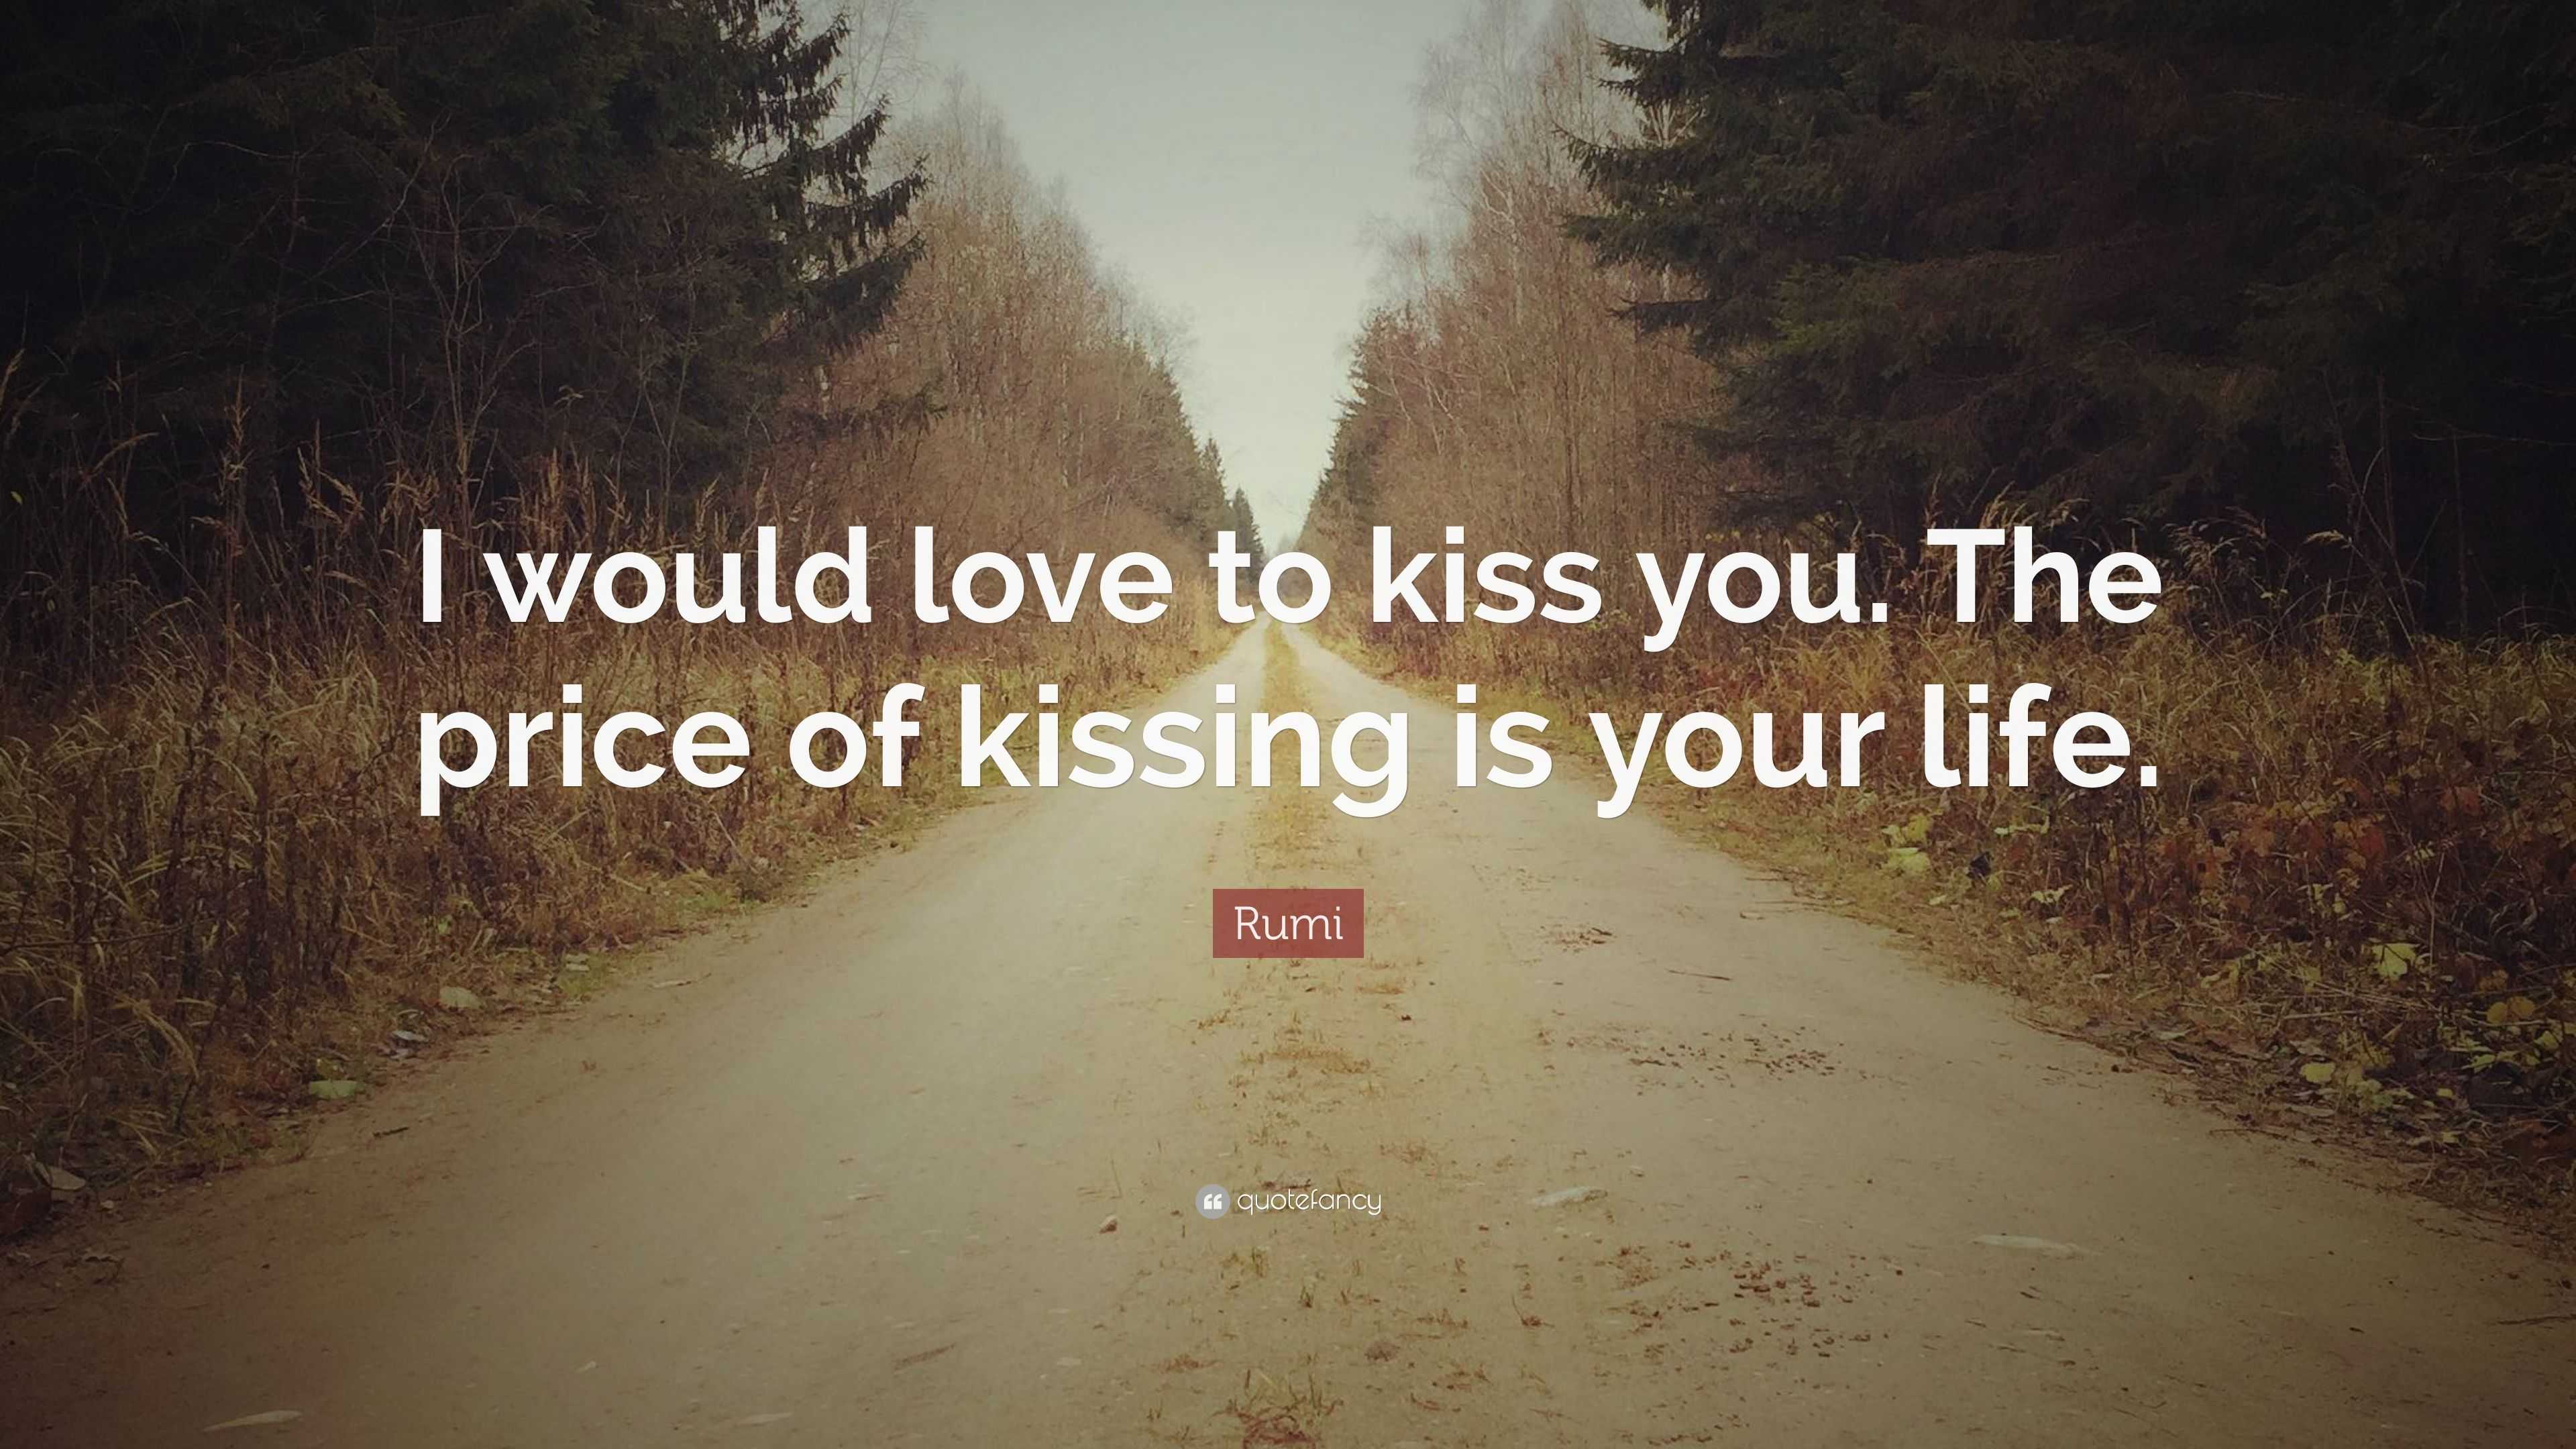 Rumi Quote: “I would love to kiss you. The price of kissing is your life.”